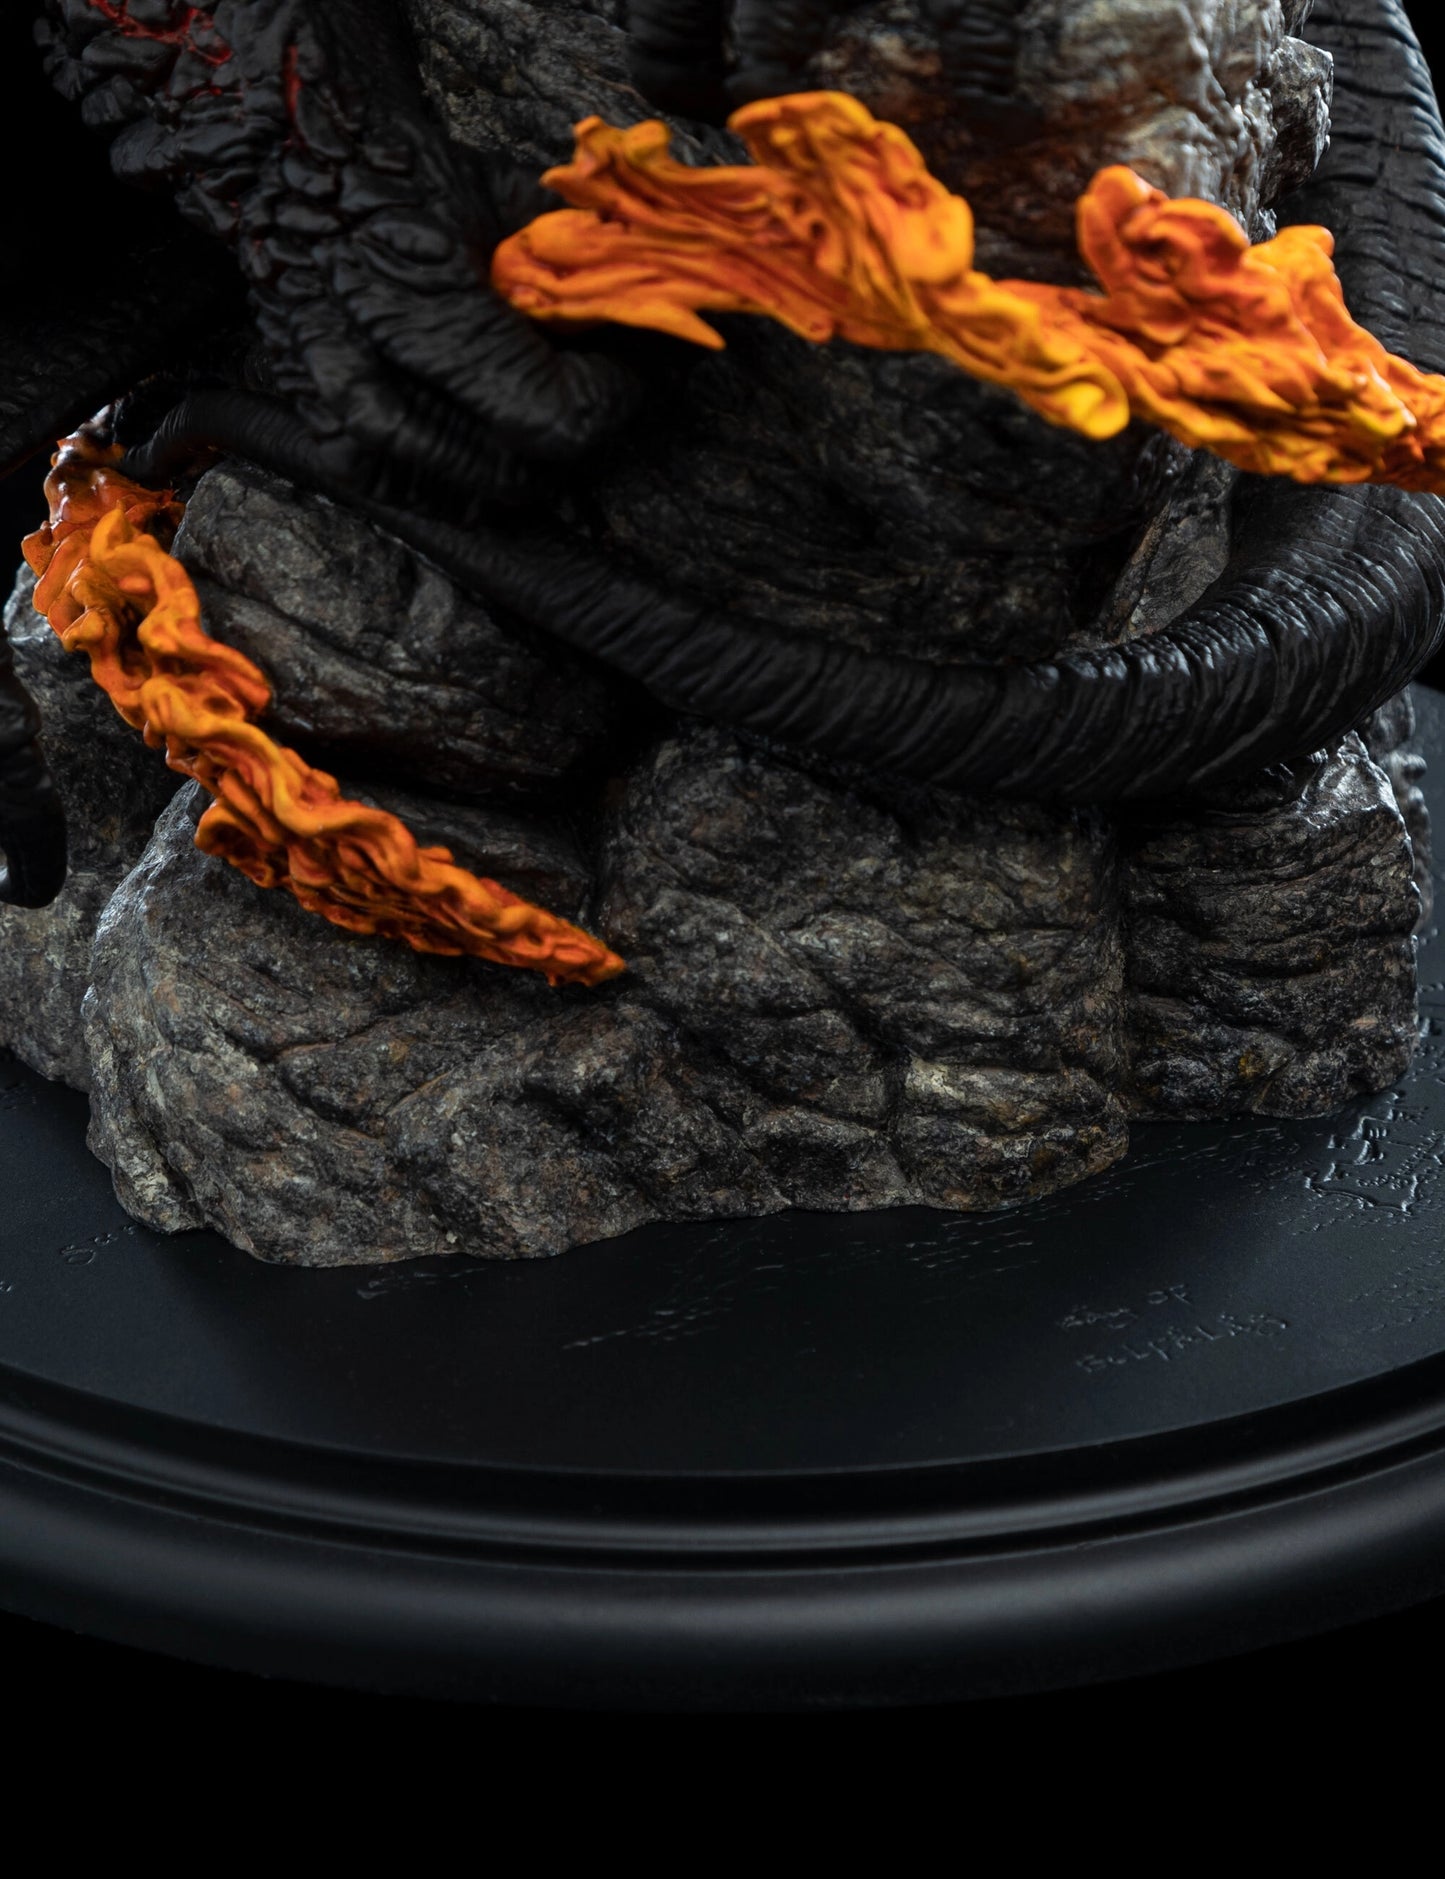 Load image into Gallery viewer, The Balrog (Lord of the Rings) 20th Anniversary Statue by Weta Workshop
